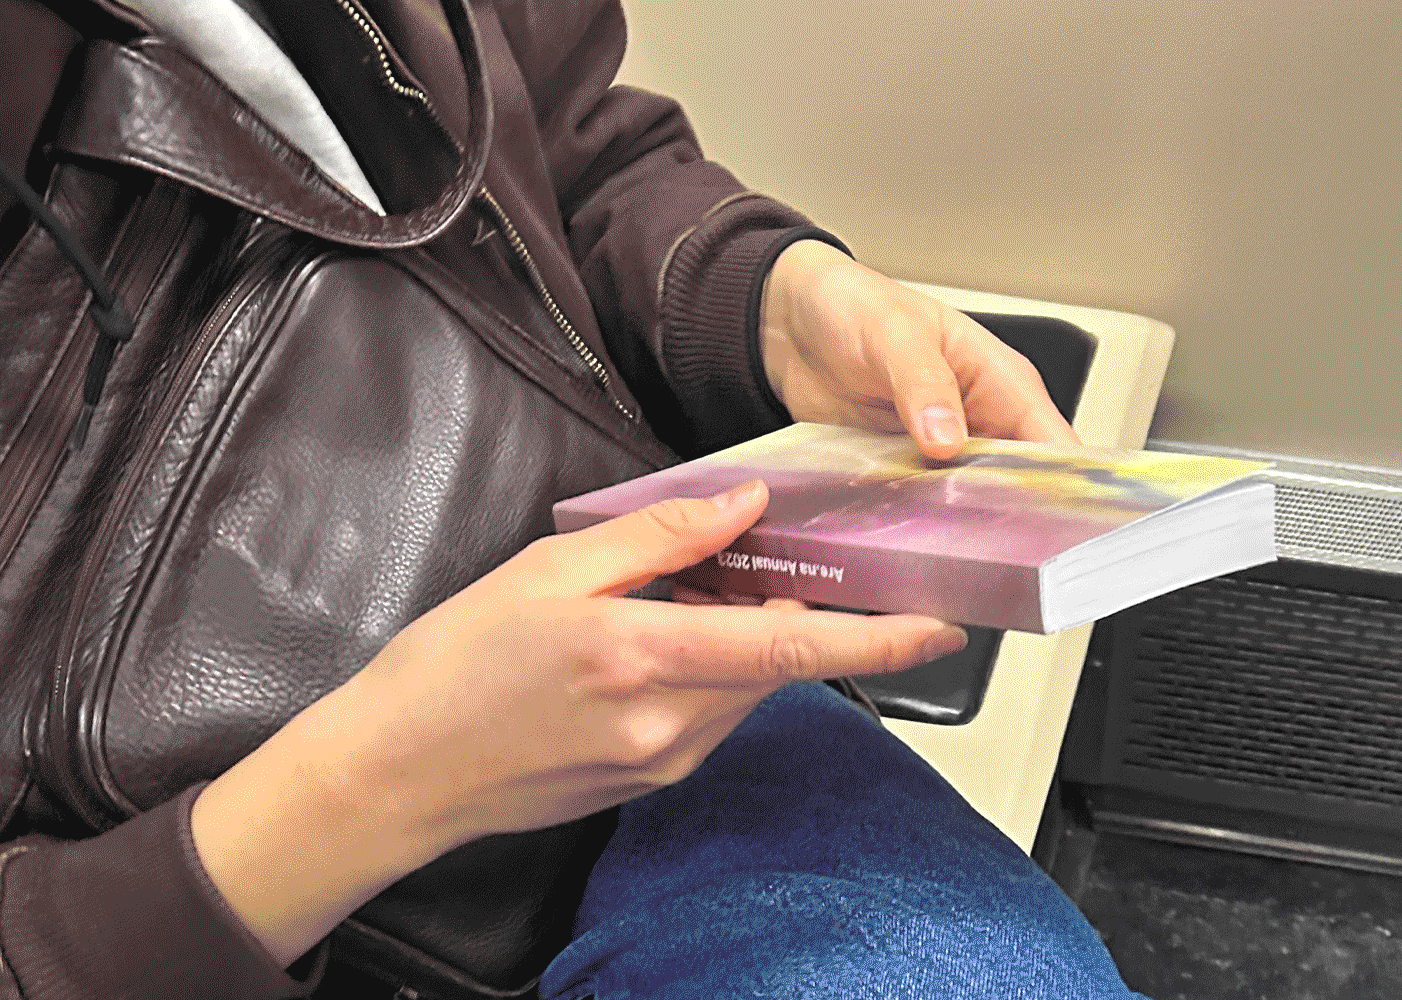 a person holding a thick, narrow book, examining the back cover. the cover is in vibrant purple and beige hues, depicting an abstract texture.